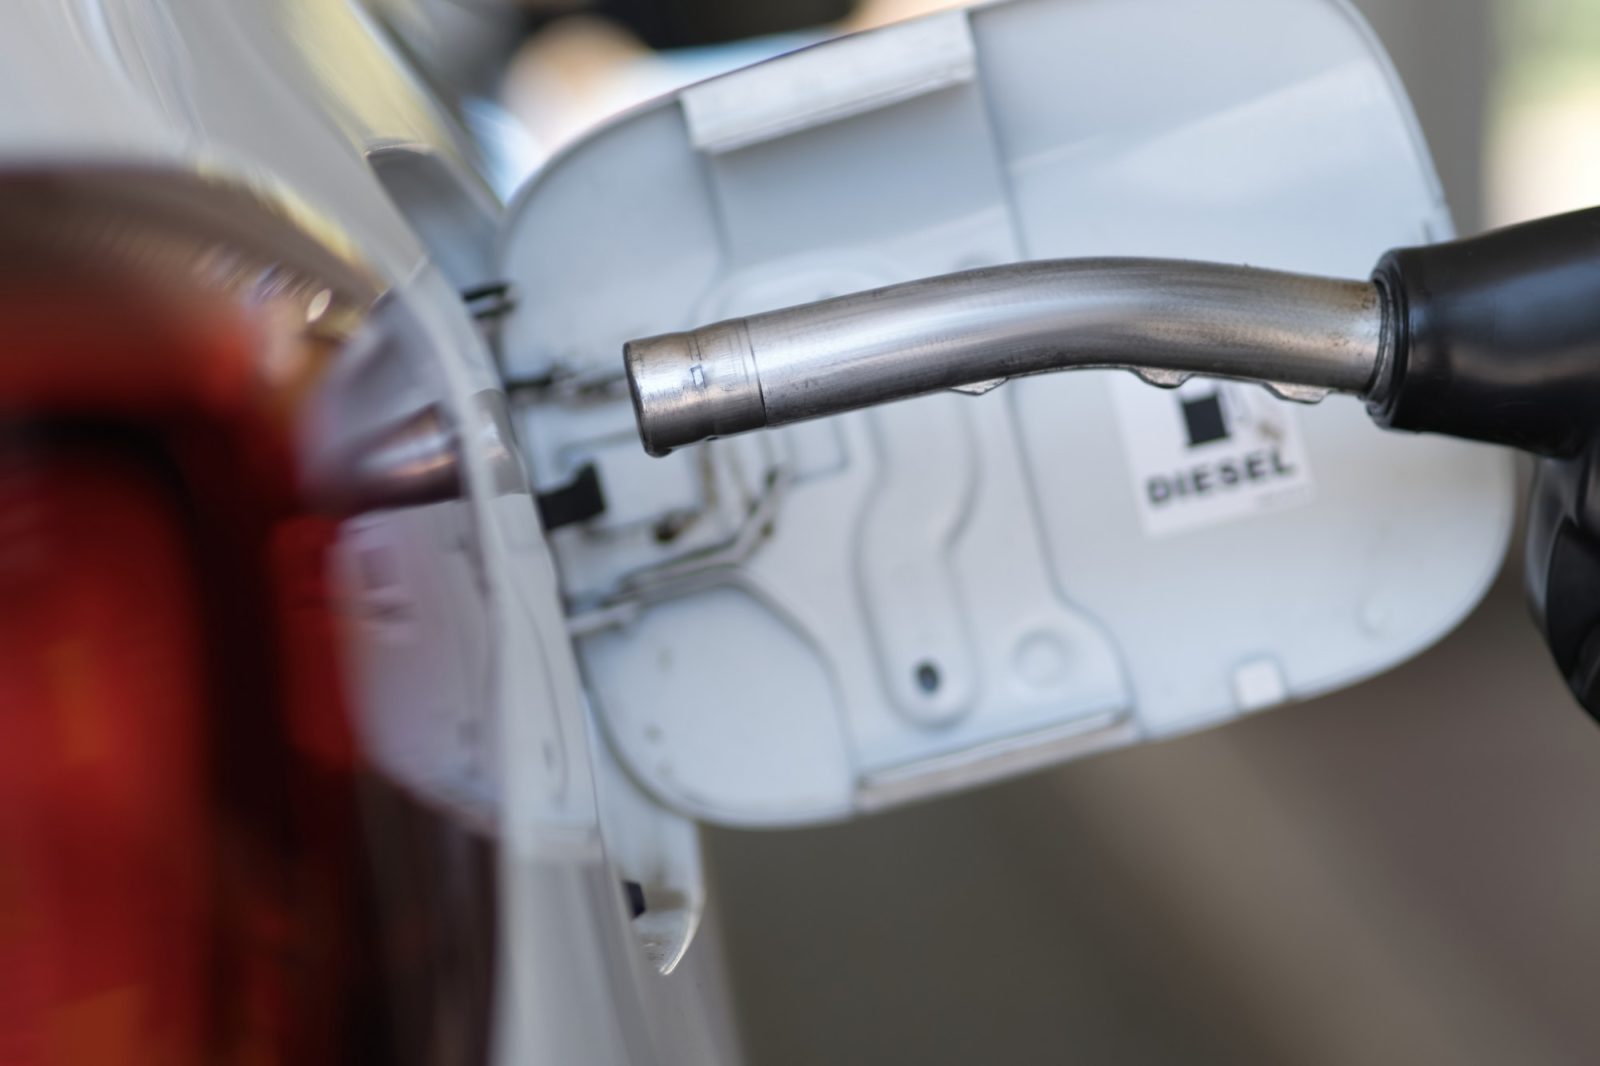 Petrol pump filling fuel nozzle in fuel tank of car at gas station